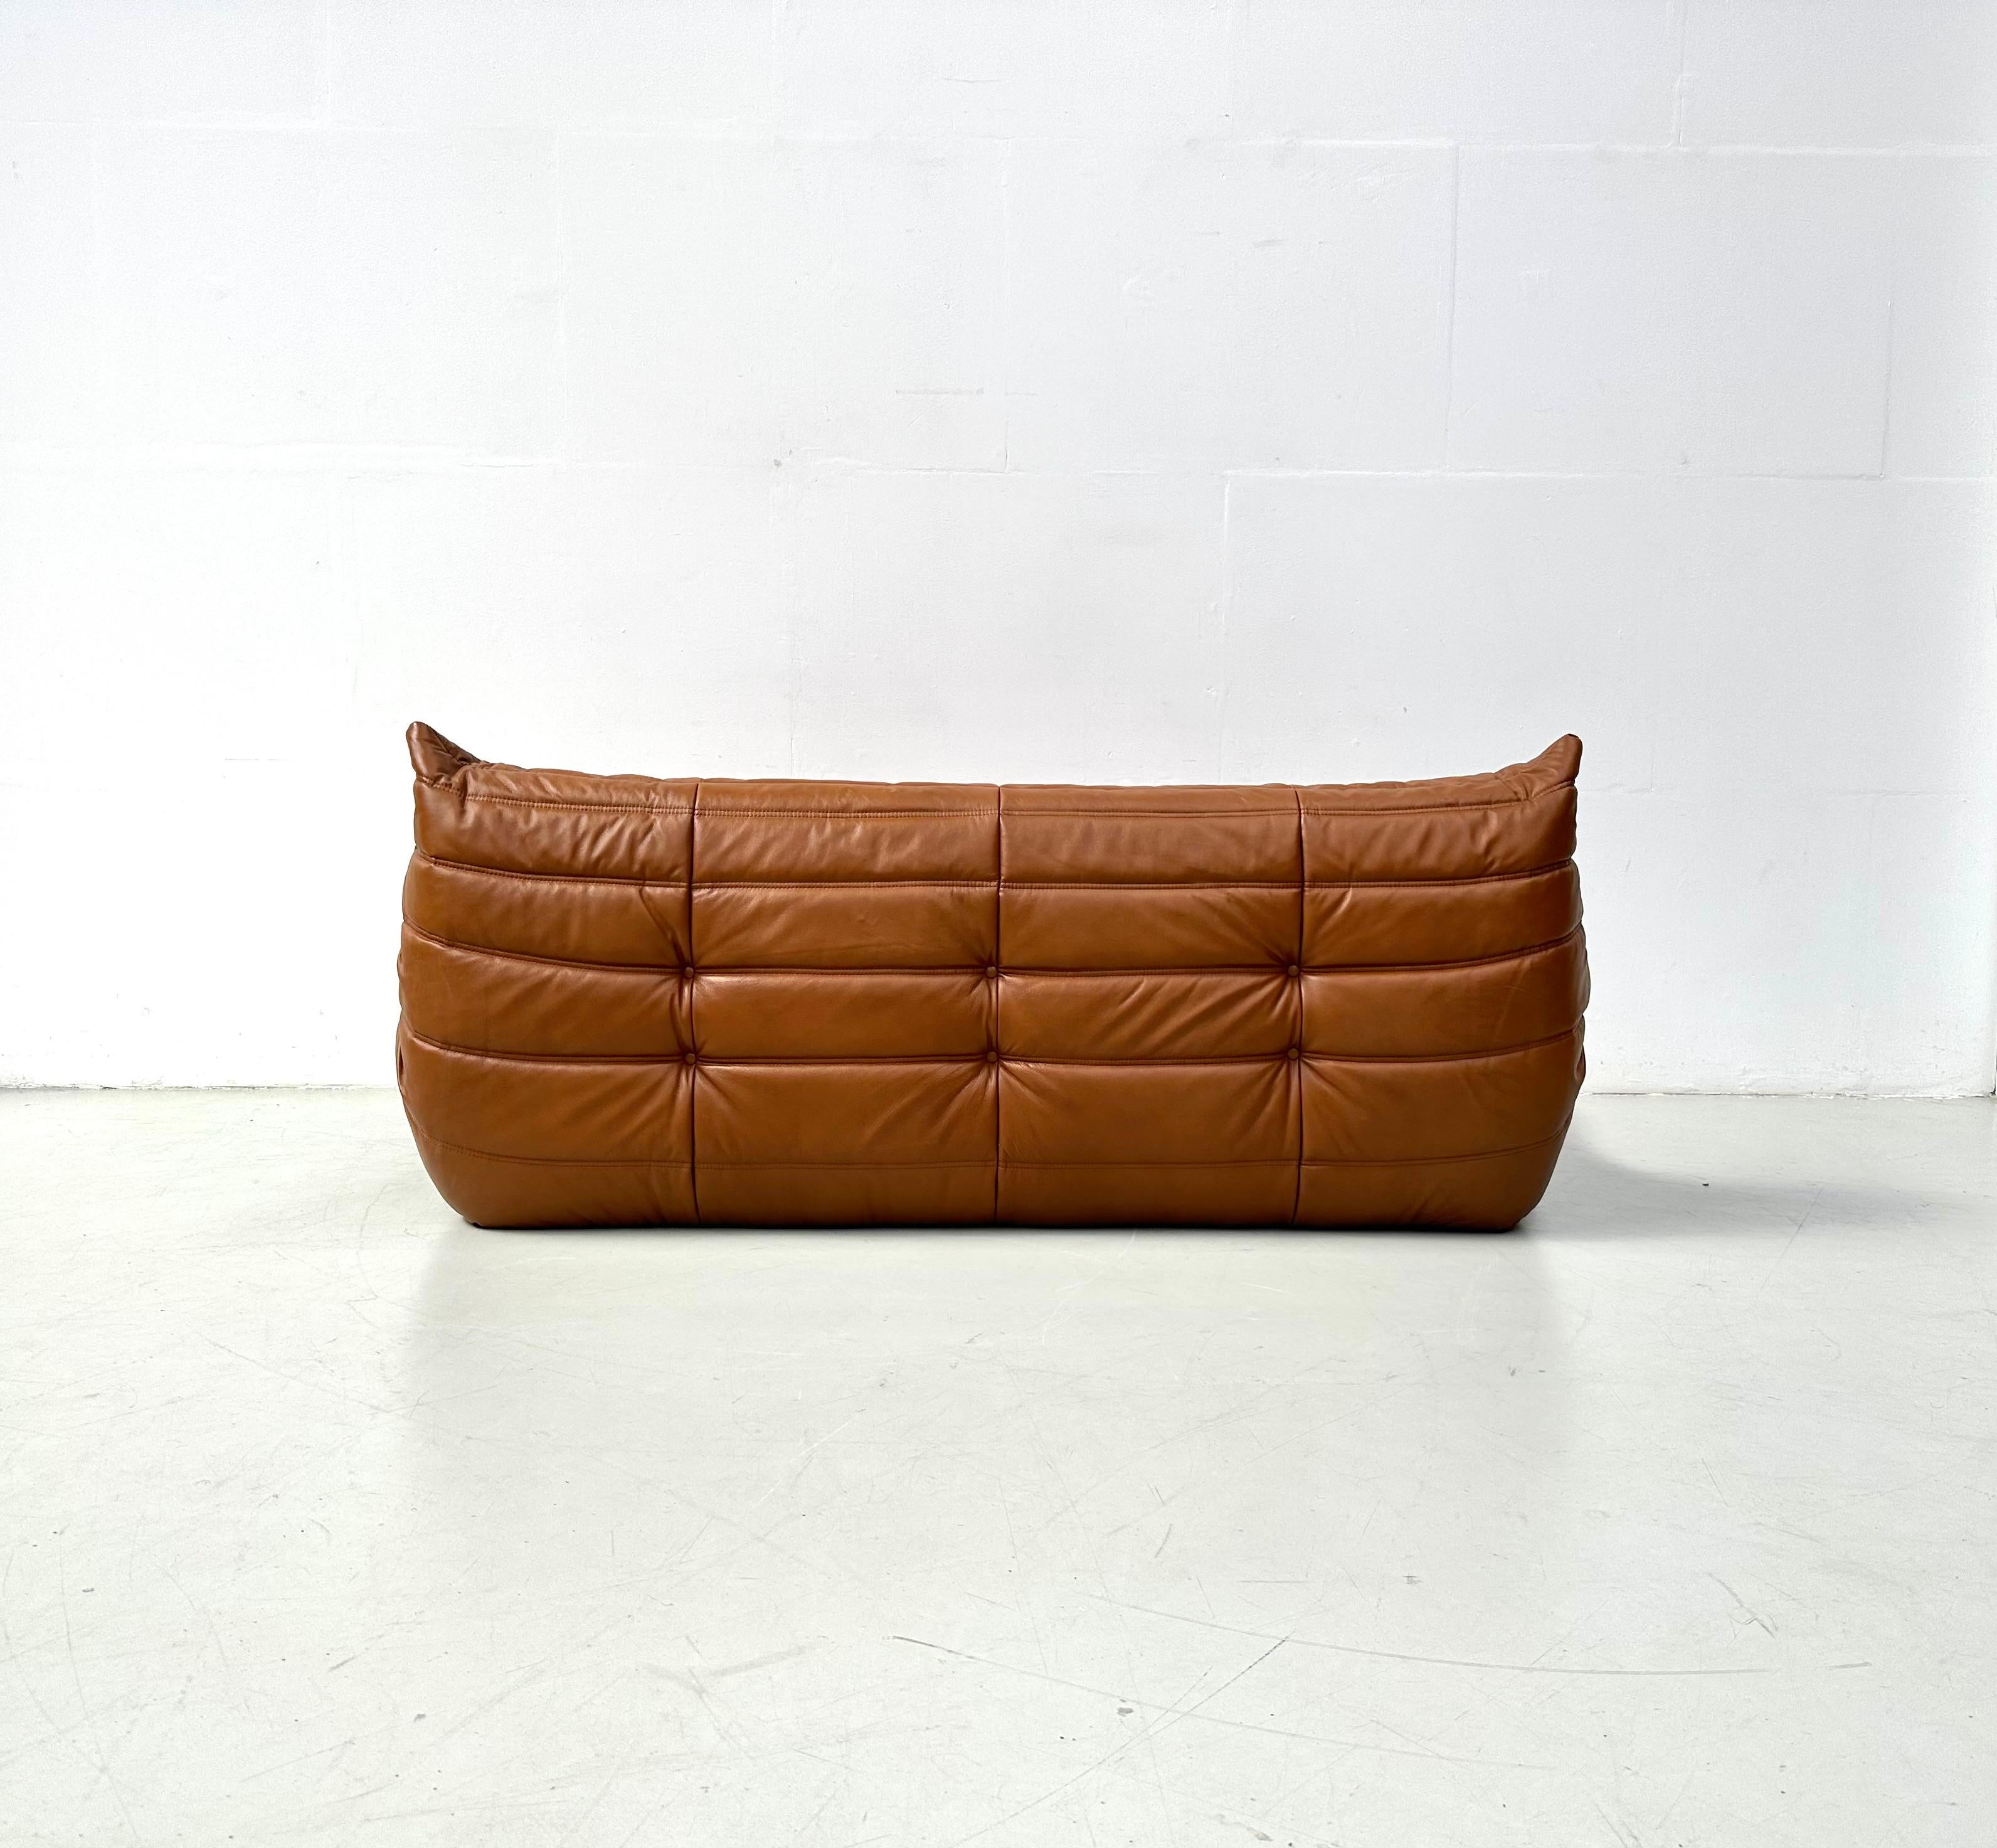 French Togo Sofa in Cognac Leather by Michel Ducaroy for Ligne Roset. For Sale 4